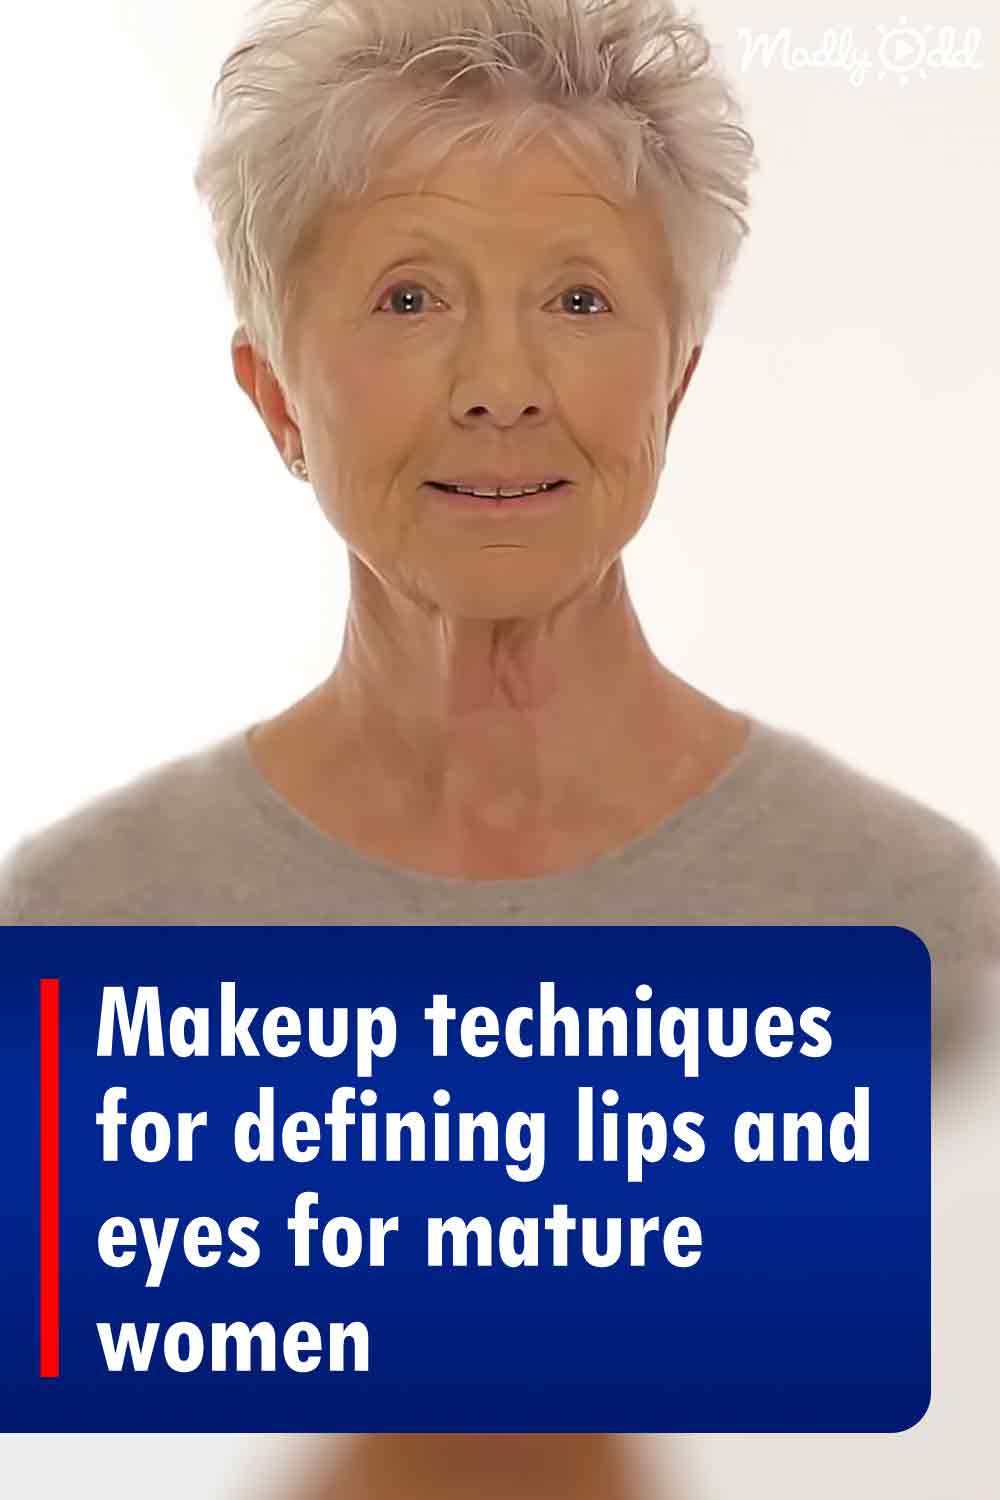 Makeup techniques for defining lips and eyes for mature women